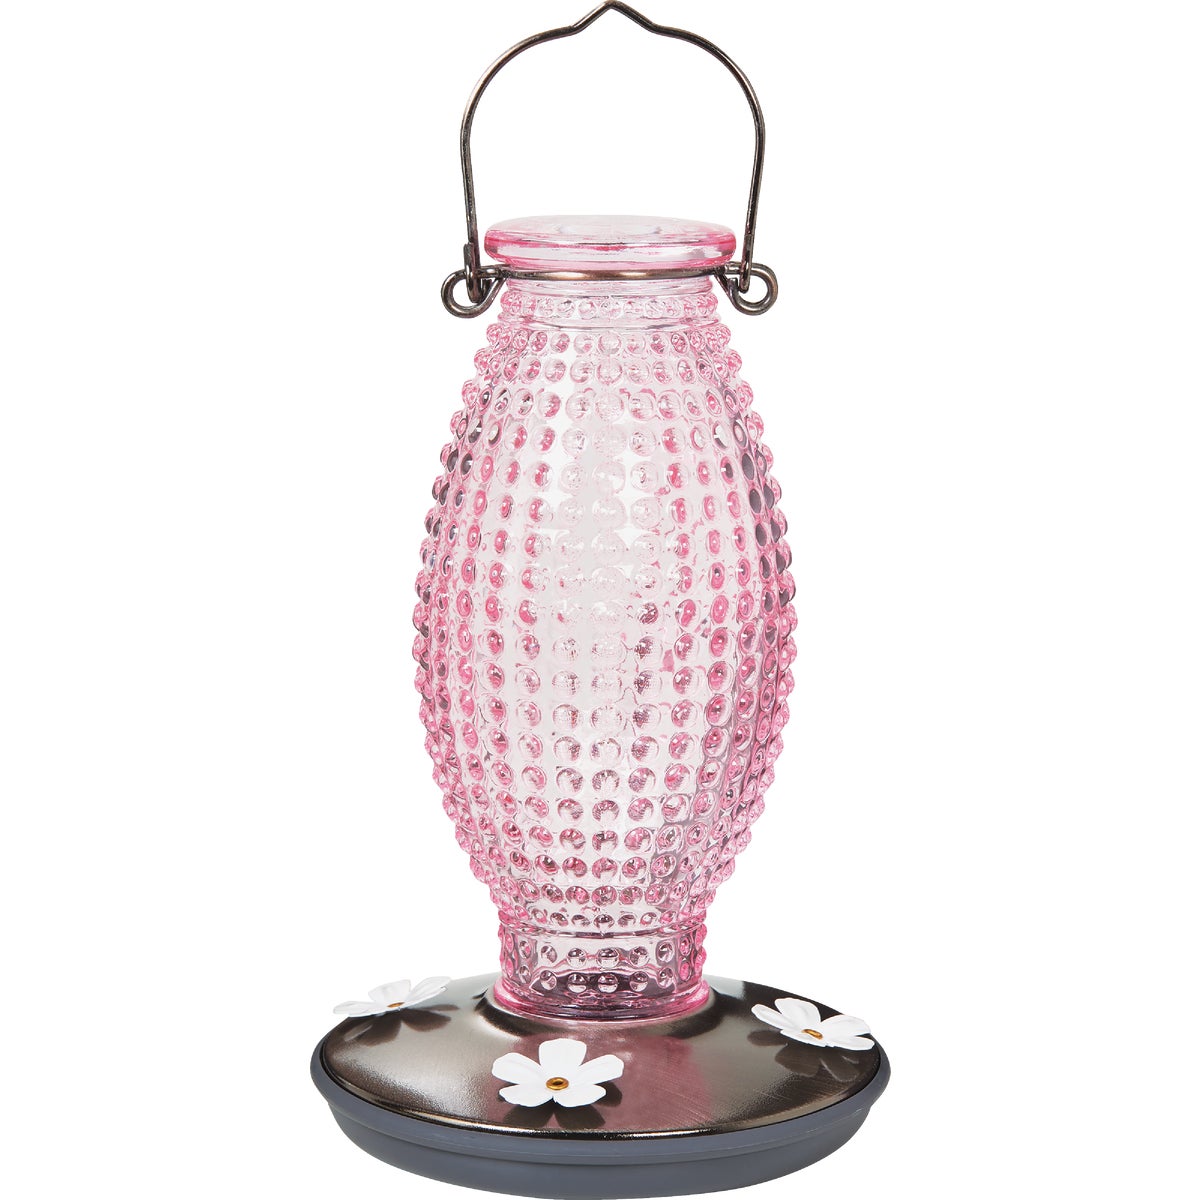 Item 705425, Vintage cranberry hobnail hummingbird feeder has a glass bottle with a pale